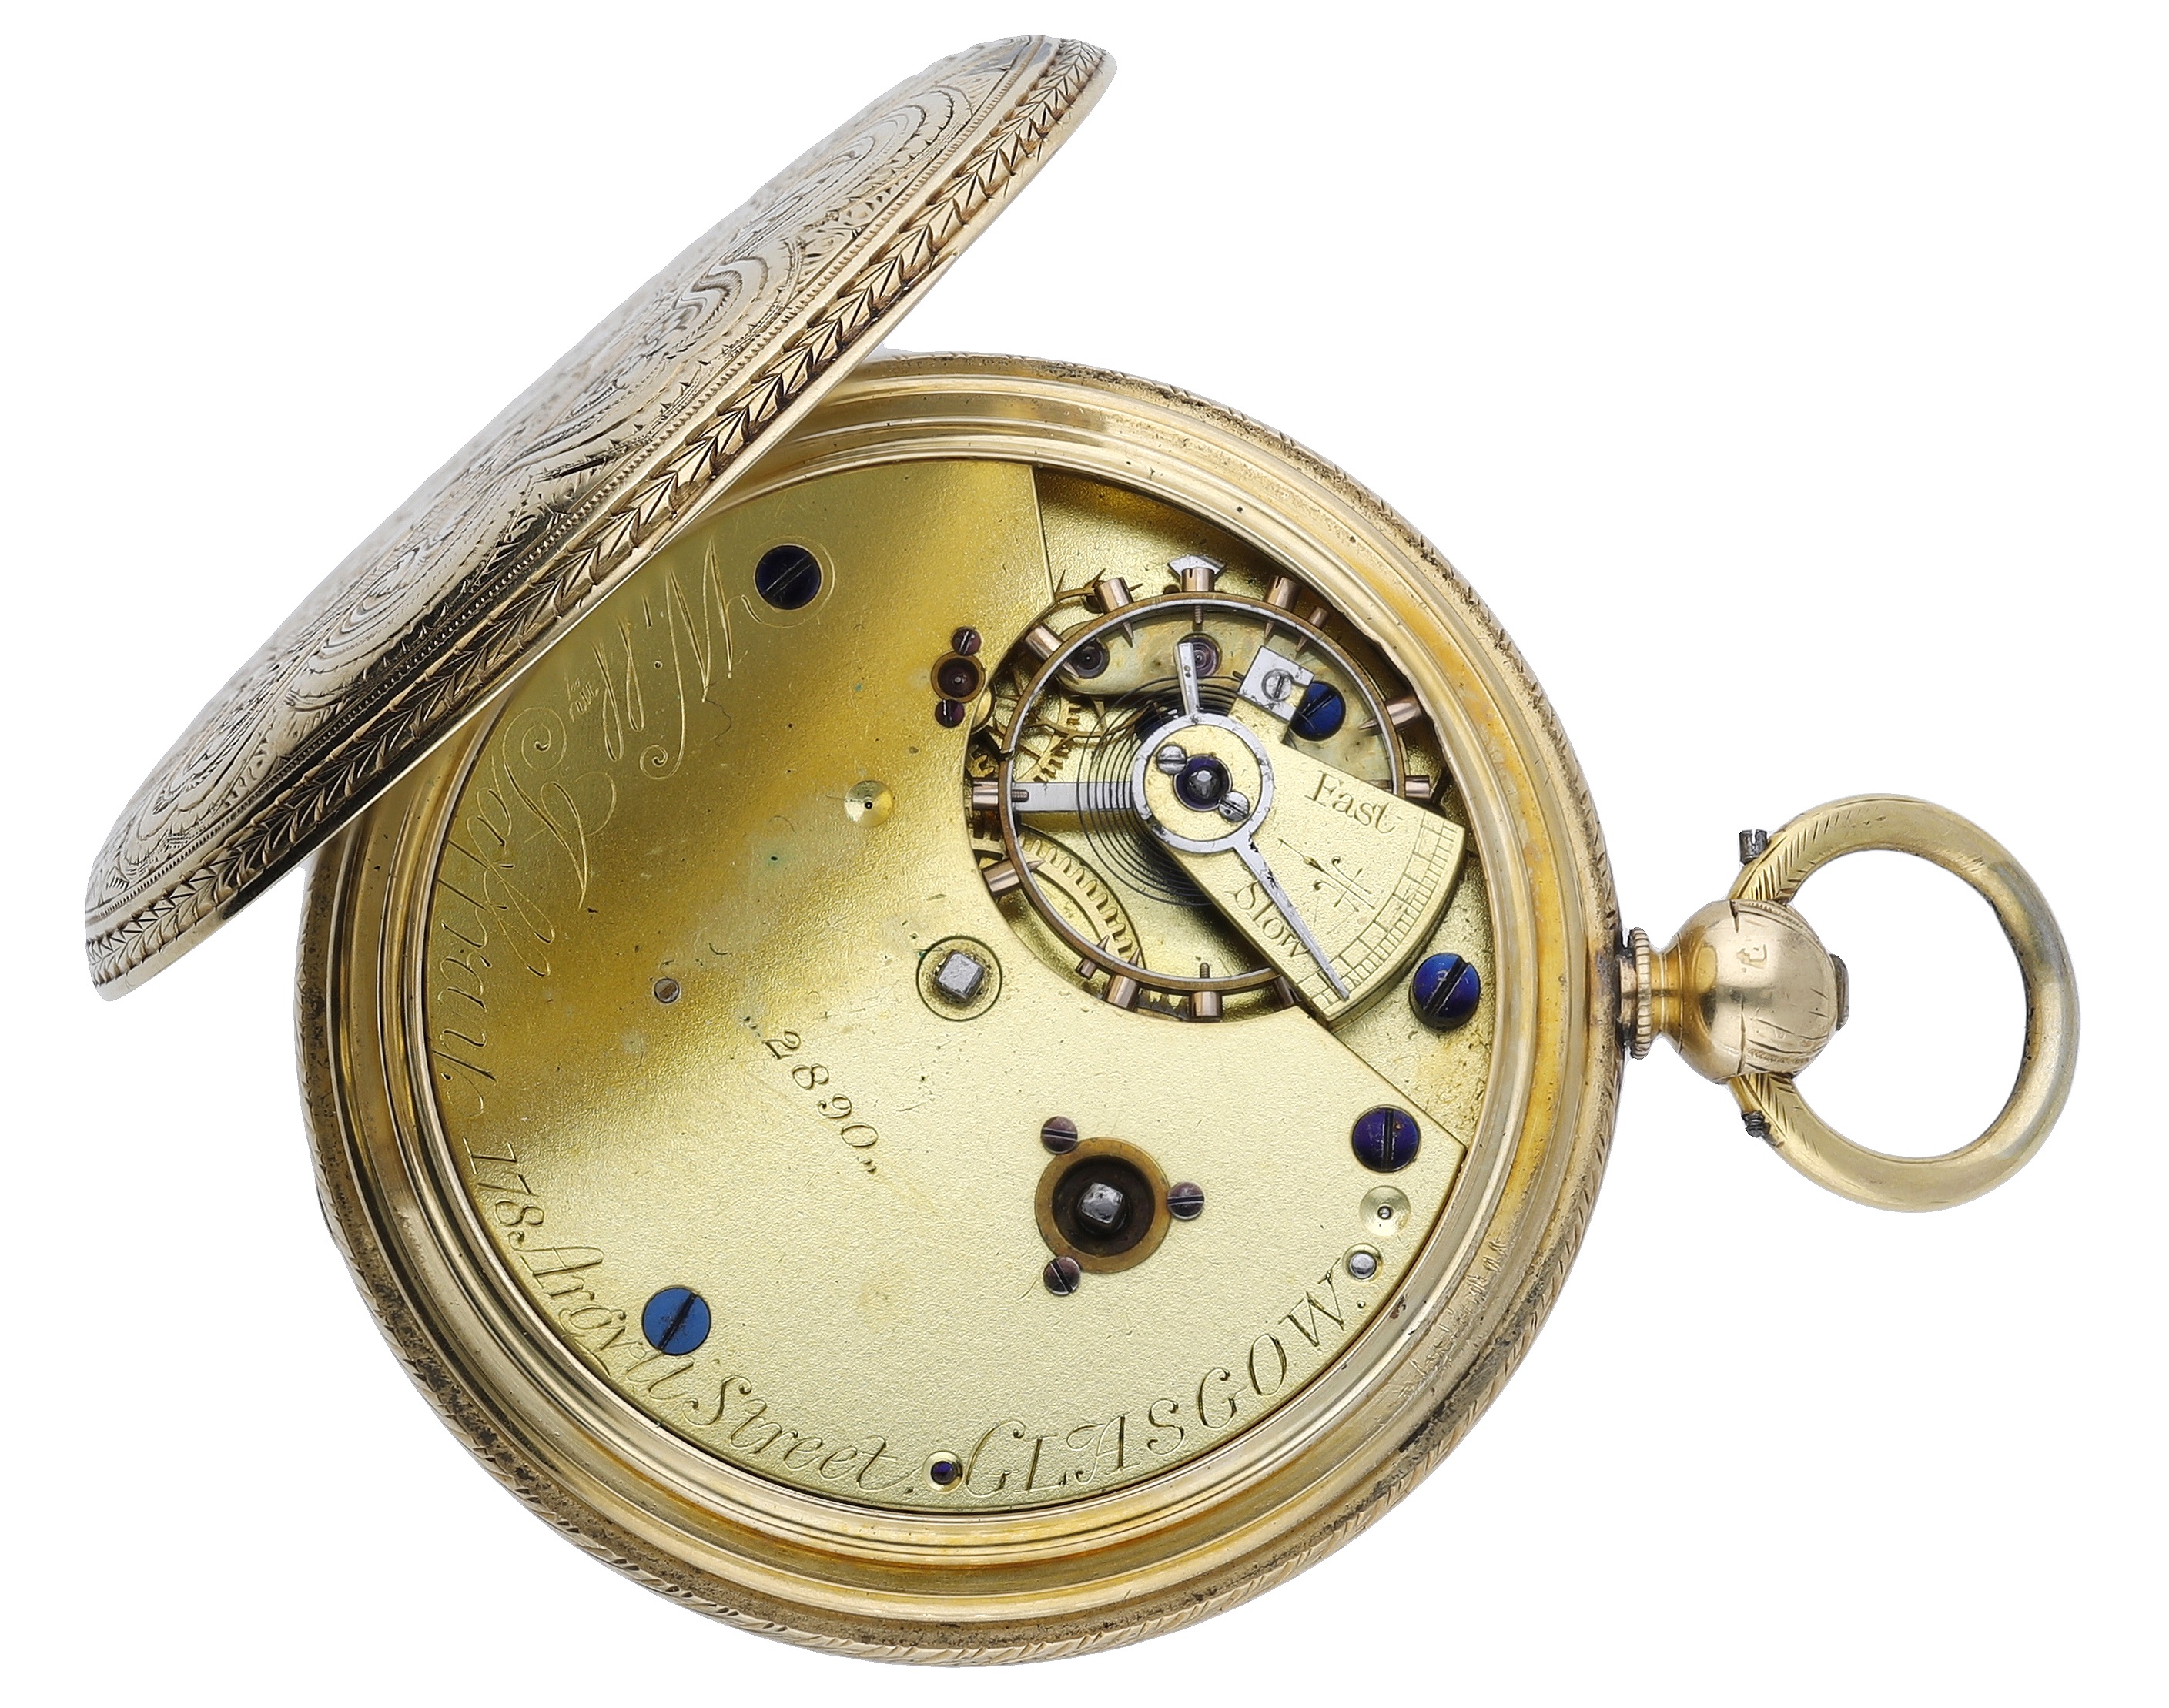 William Jaffray, Glasgow. A gold hunting cased watch, 1866. Movement: three quarter plate, lever... - Image 2 of 3